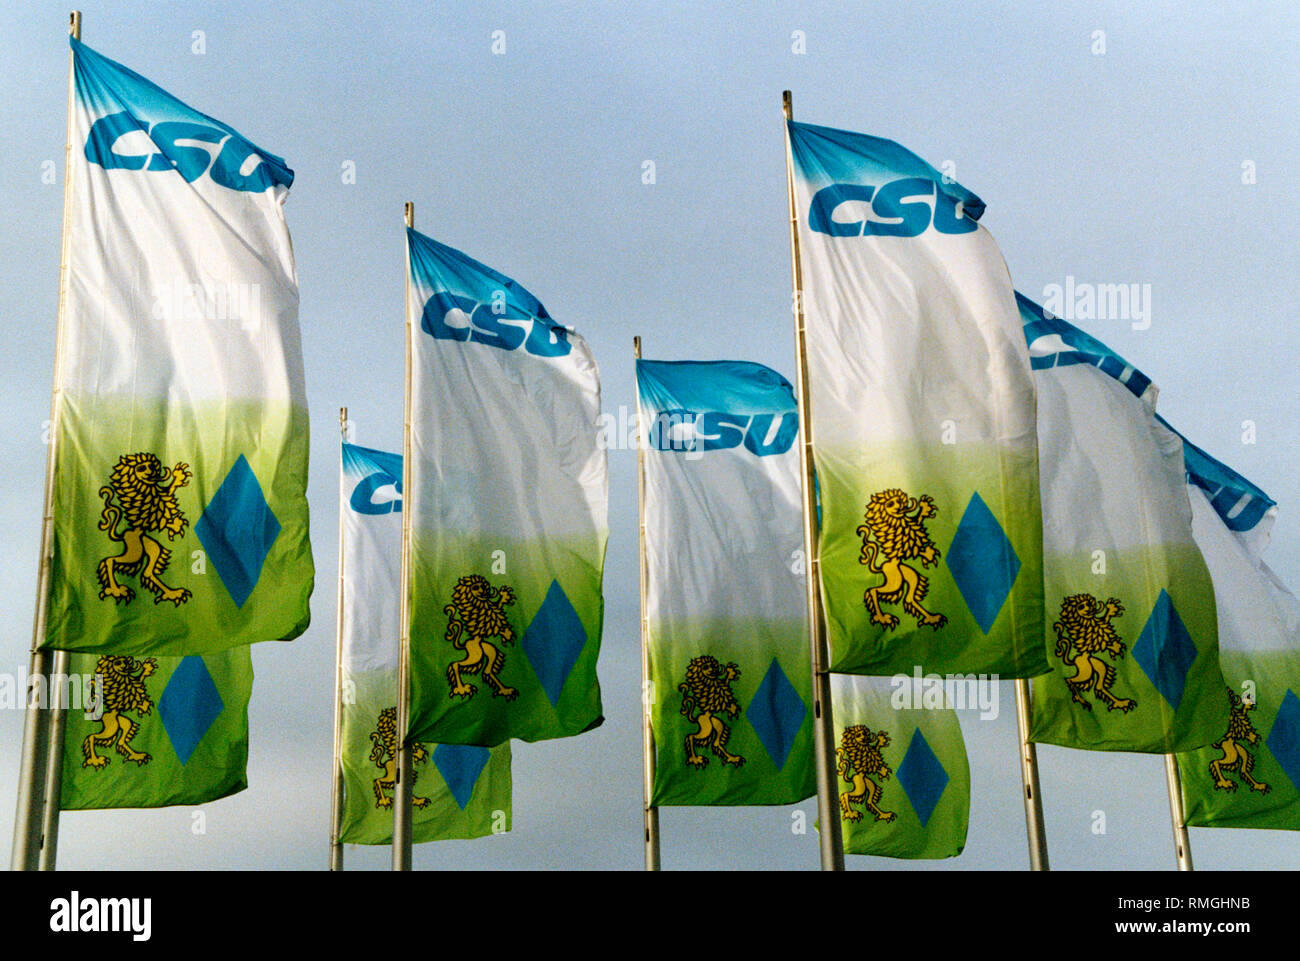 This photo shows flags of the CSU blowing at the CSU party congress in Munich. Stock Photo